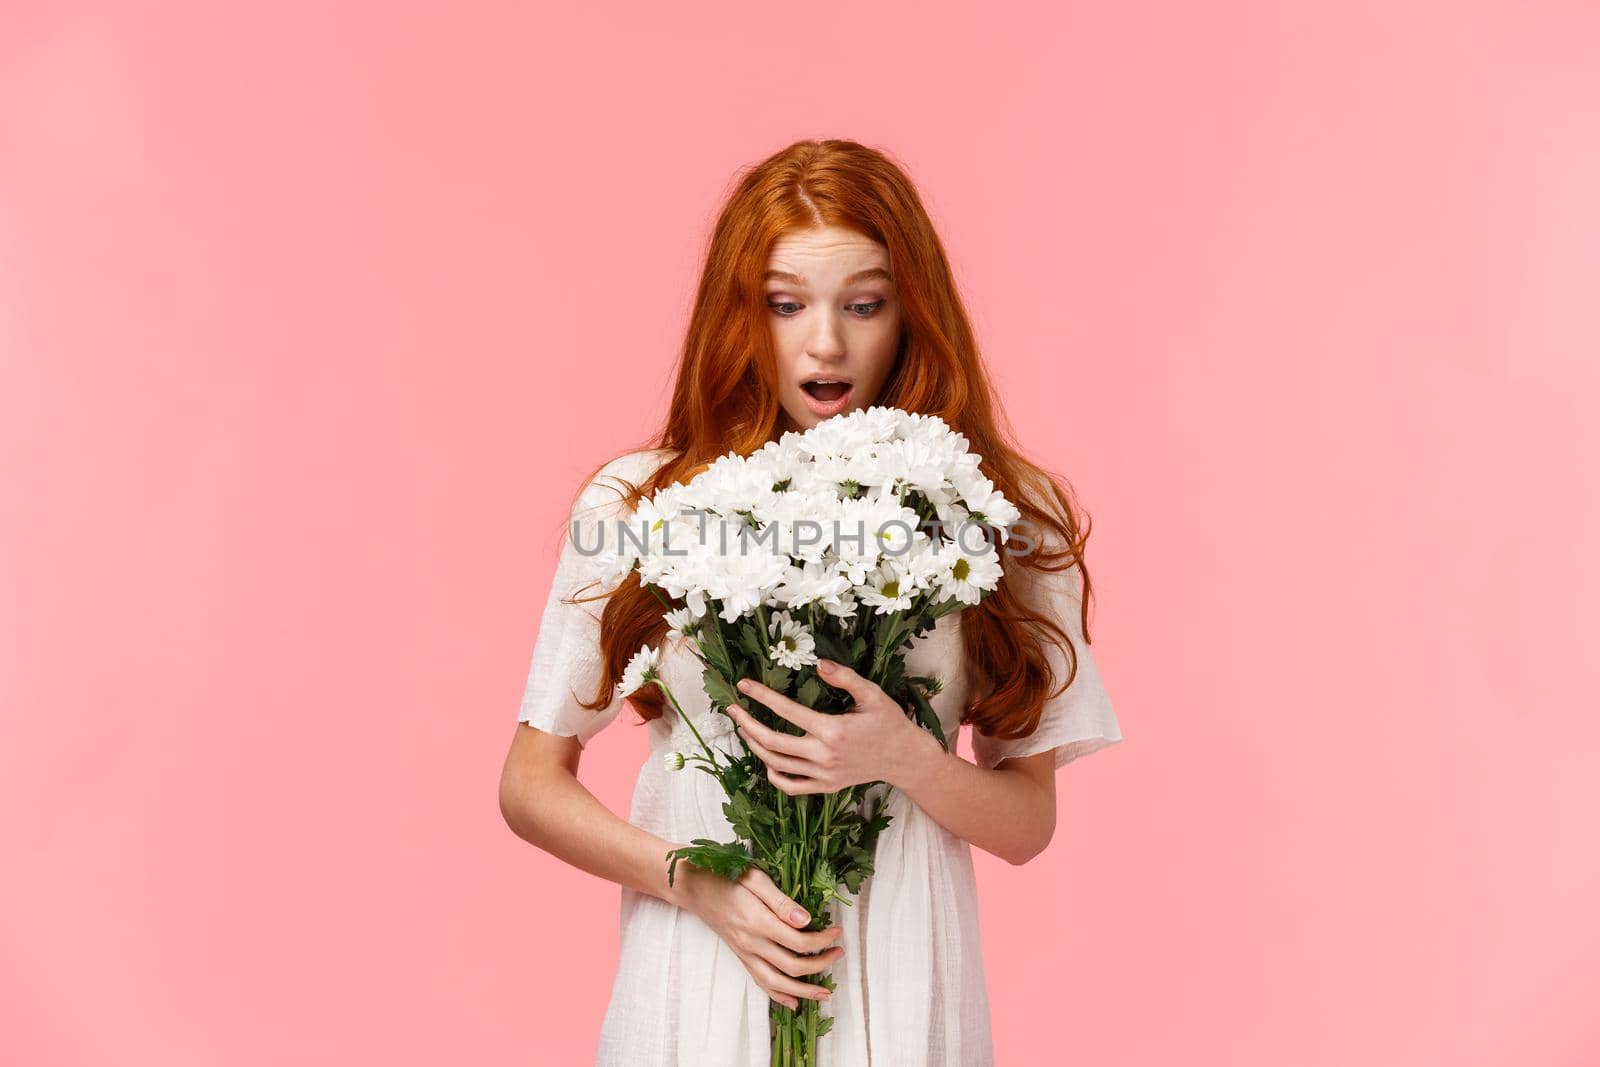 Surprised attractive redhead girl receive romantic valentines day gift, looking at beautiful bouquet of flowers amazed and wondered who might sender be, standing over pink background.